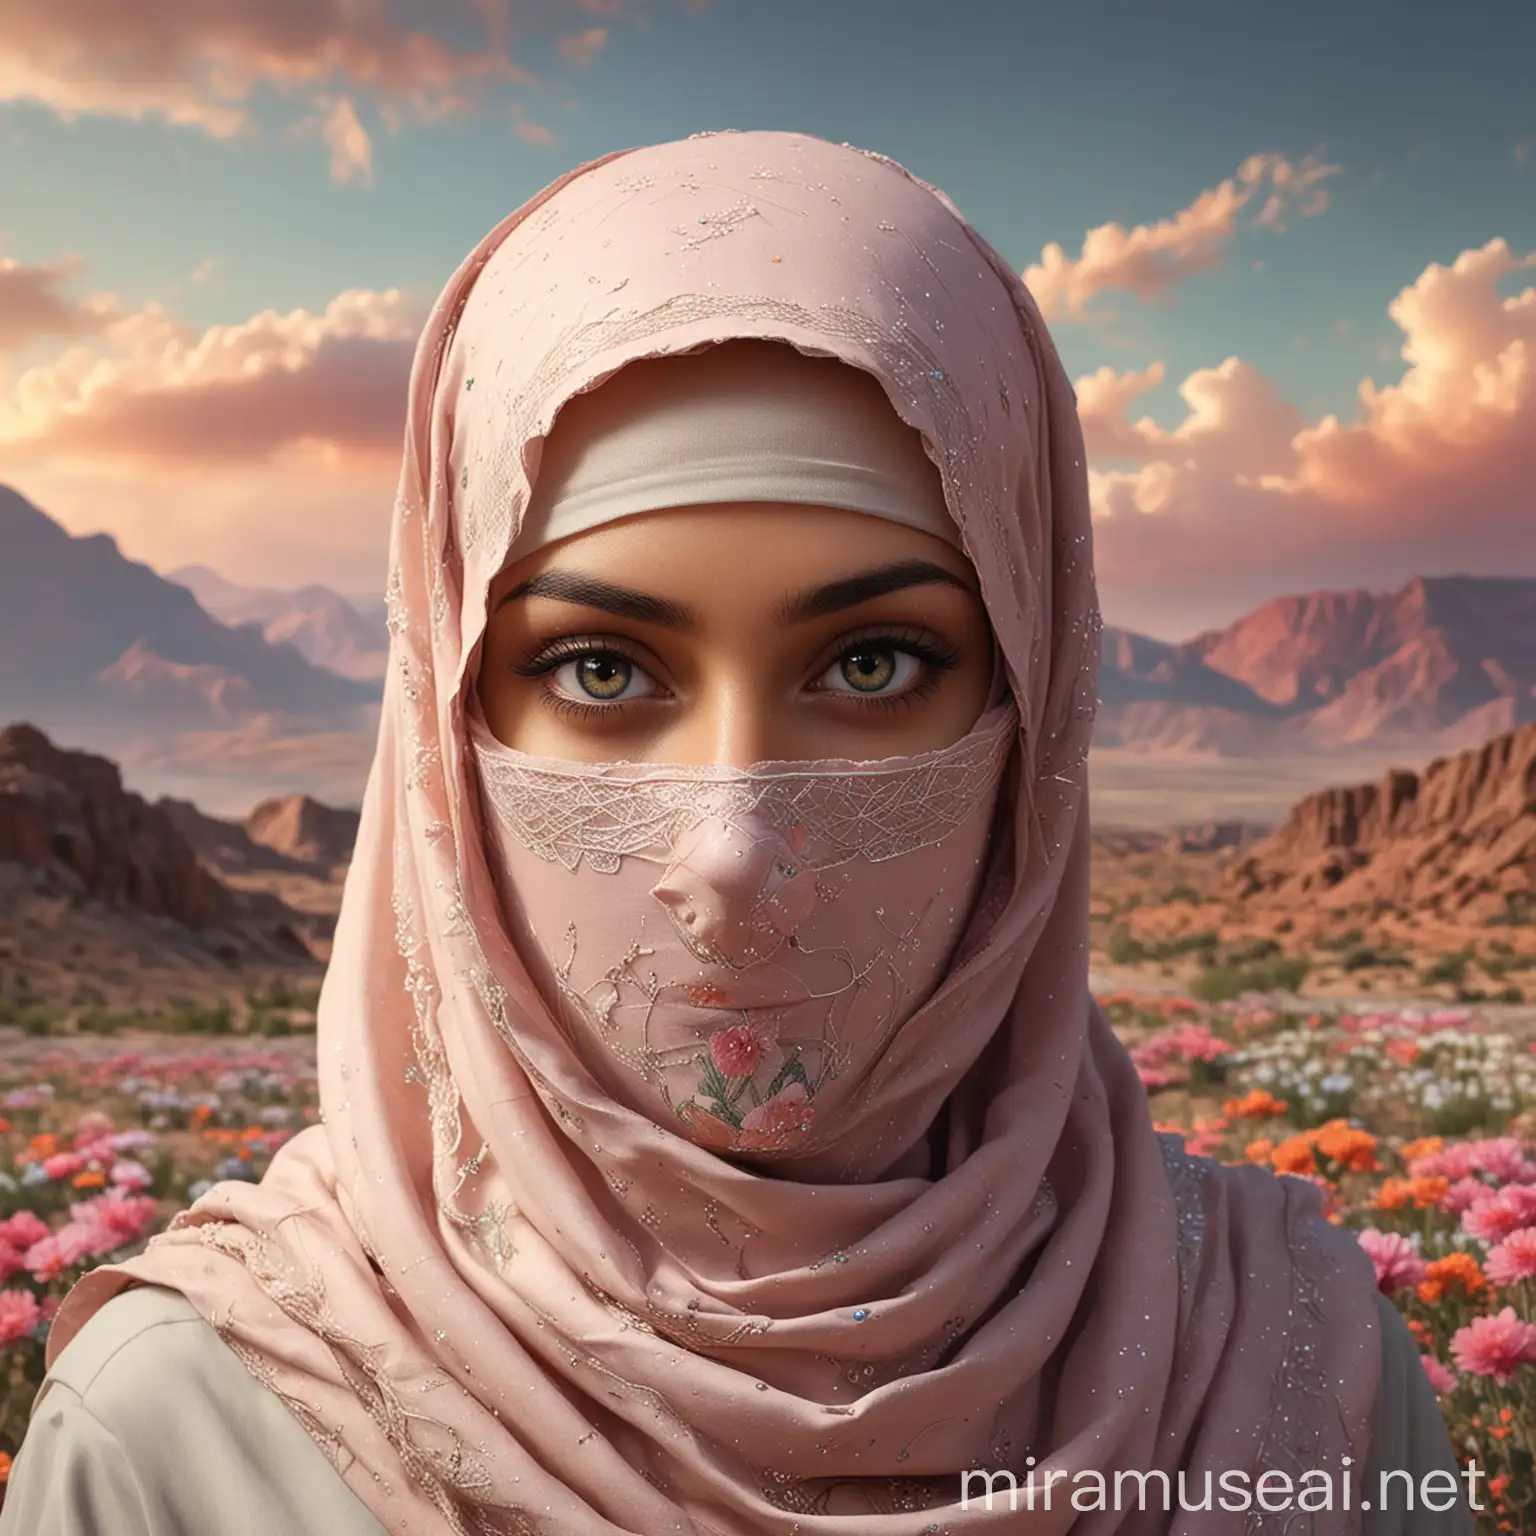 Elegant Woman in Hijab and Niqab Graceful Eyes and Textured Fabric